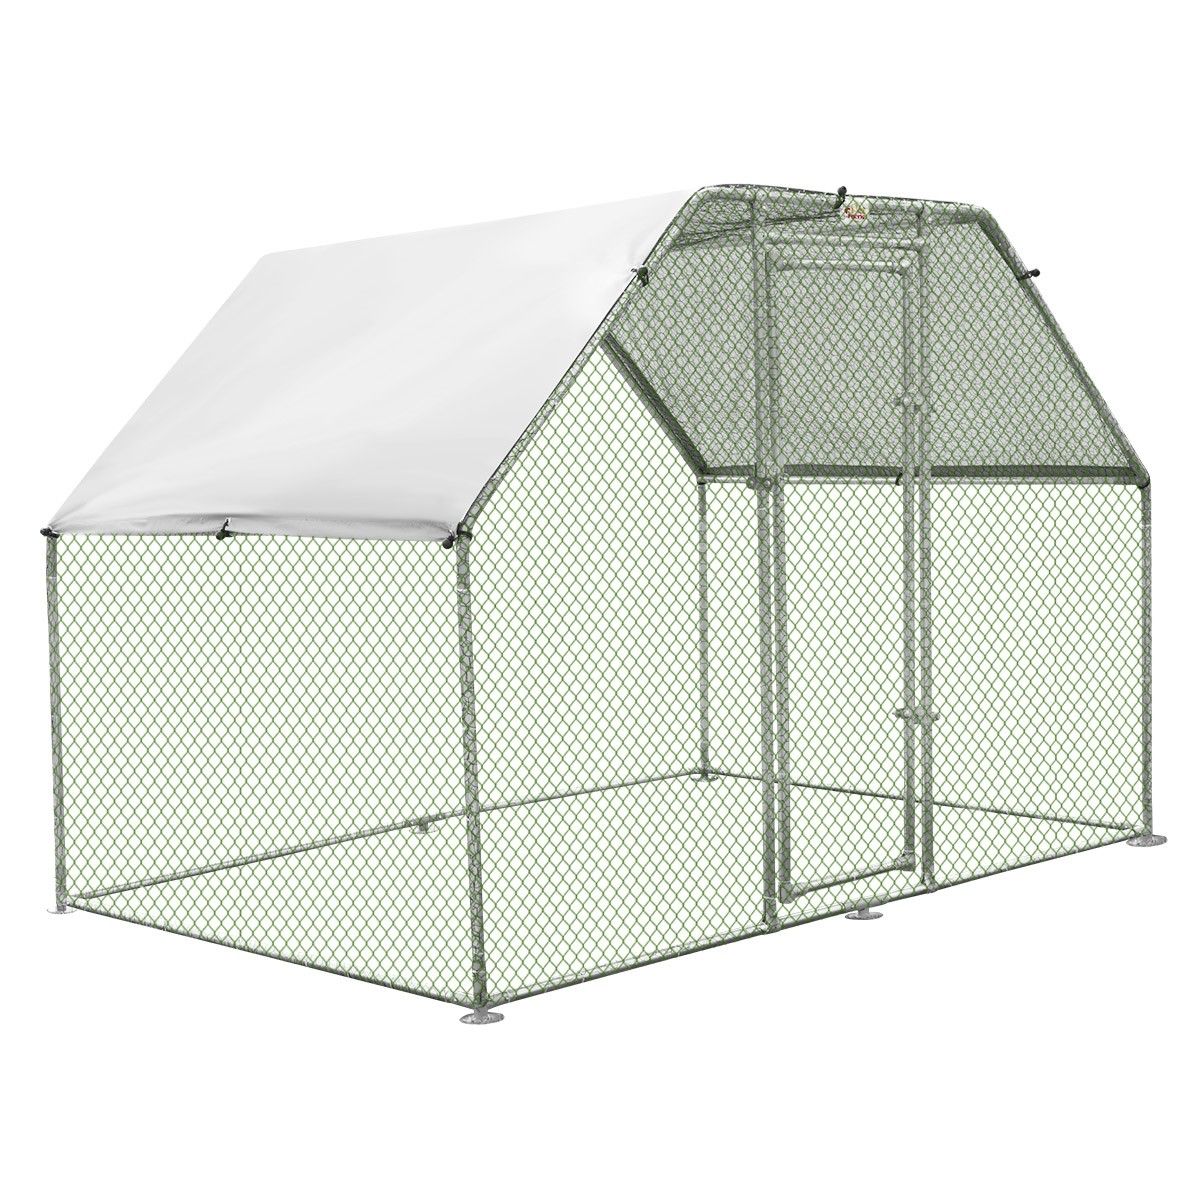 1.9M x 2.8M Large Metal Chicken Coop Walk-in Cage Run House Shade Pen W/ Cover 